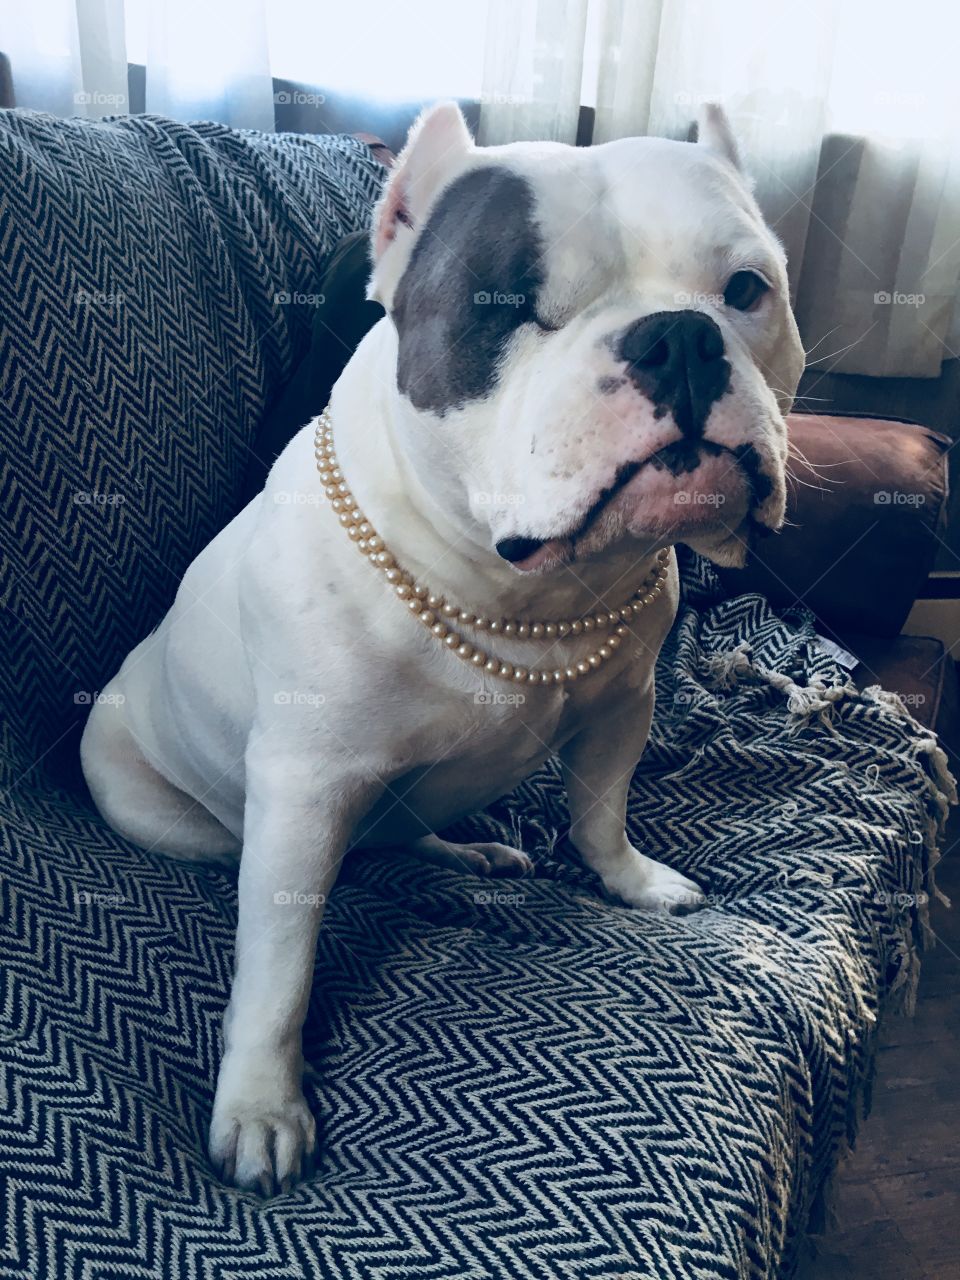 Love her pearls